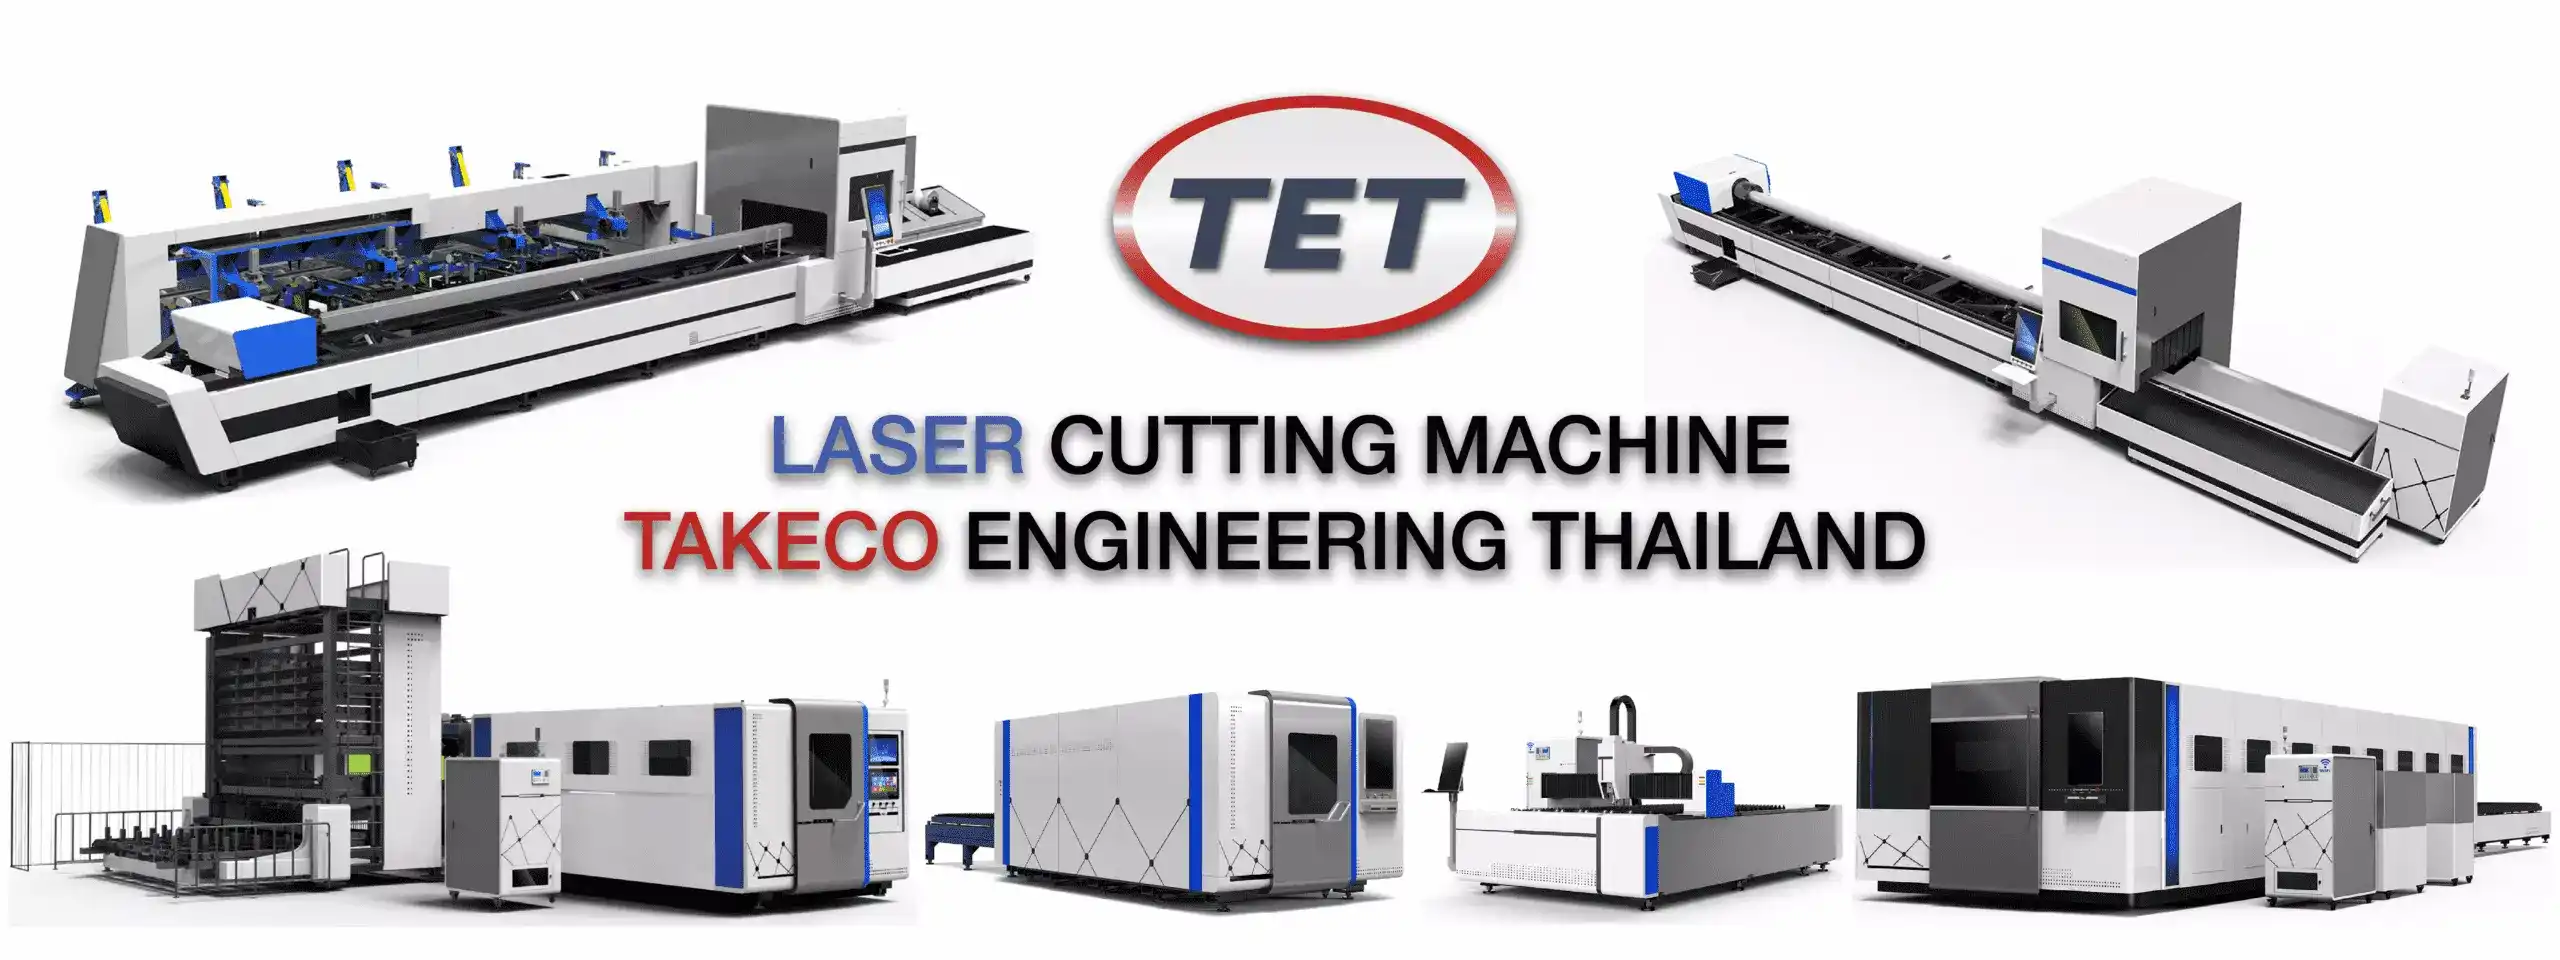 takeco laser cutting